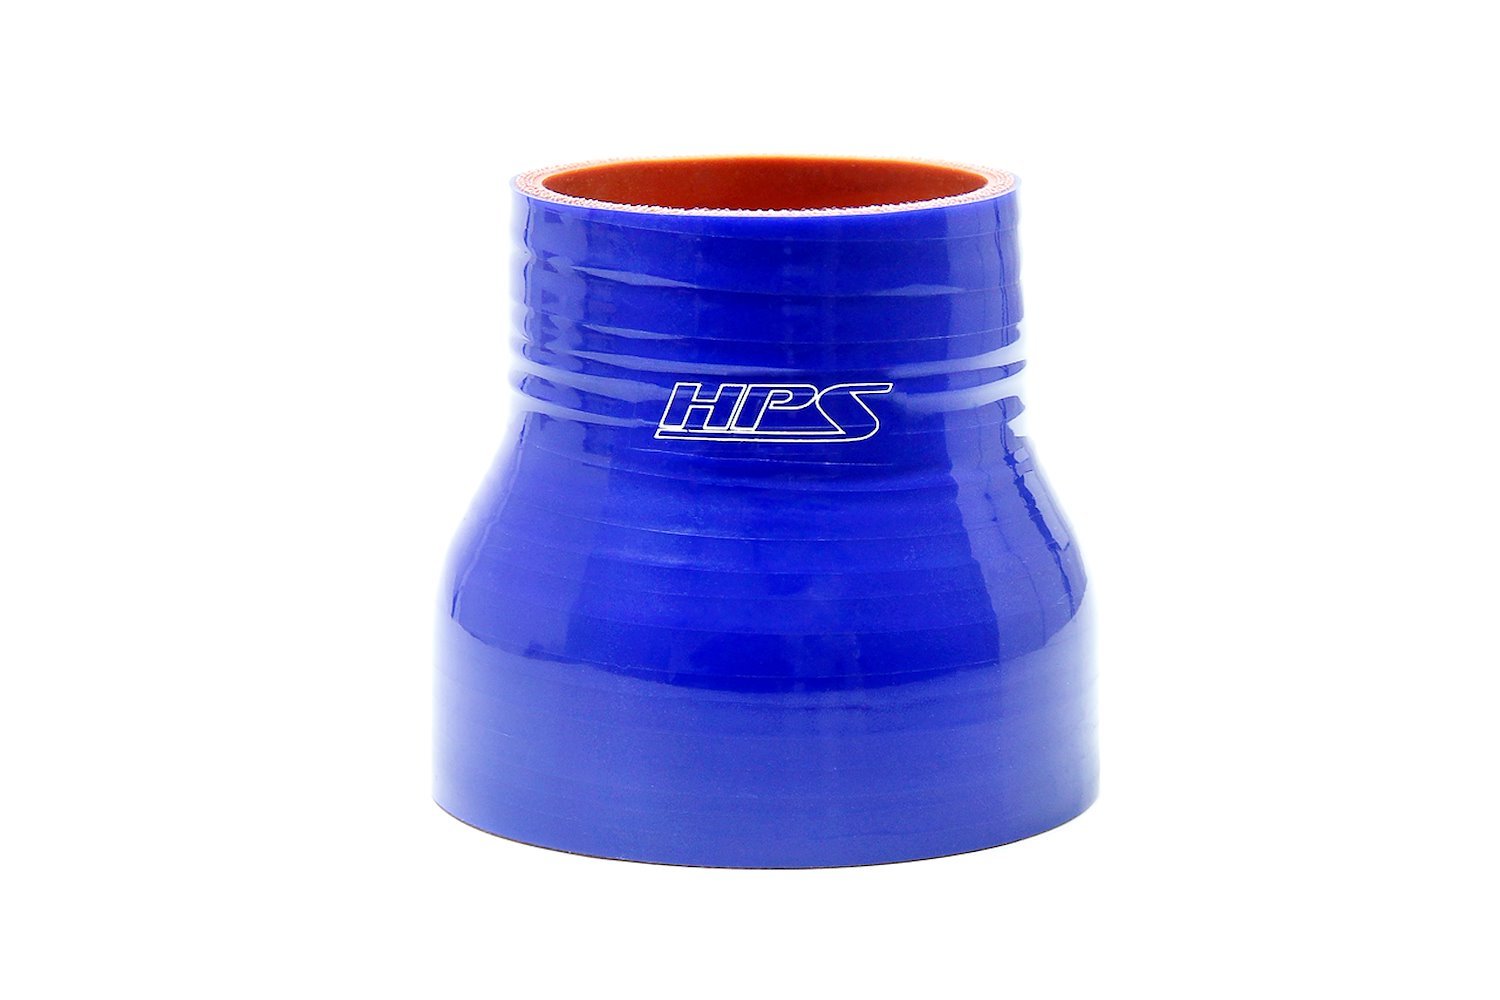 HTSR-250-300-L225-BLUE Silicone Reducer Hose, High-Temp 4-Ply Reinforced, 2-1/2 in. - 3 in. ID, 2-1/4 in. Long, Blue